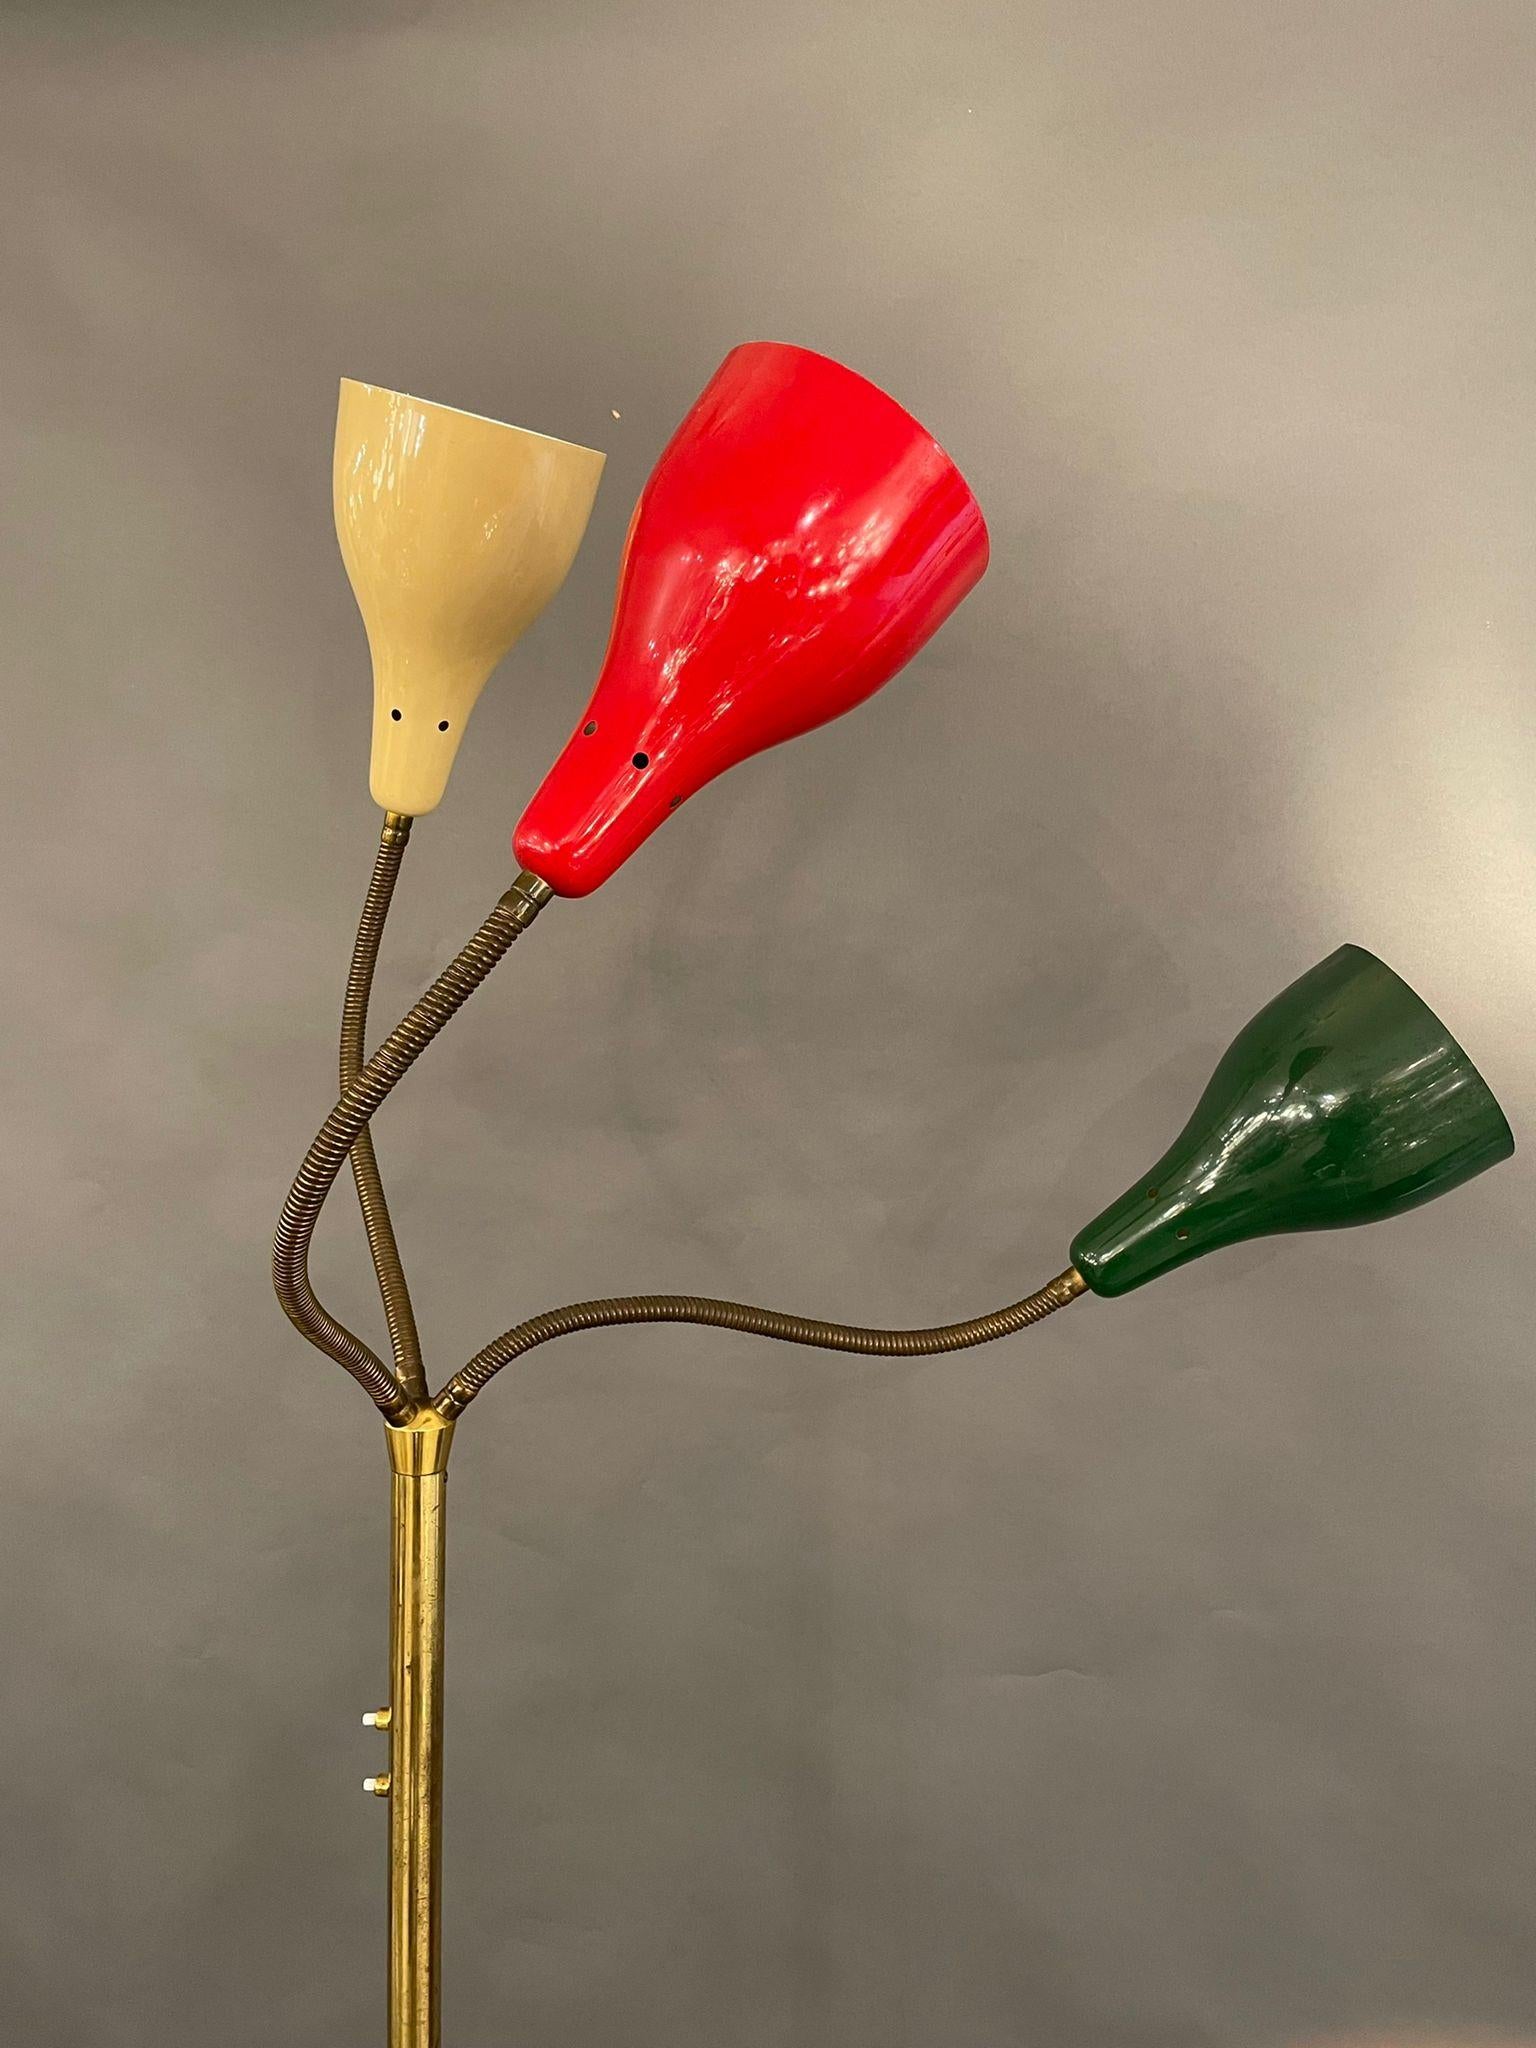 Rare Floor lamp by Giuseppe Ostuni, OLuce, Italy, 1950.

Polished brass, 3 flexible arms with origin painted reflectors
red, white, green

The lamp is in good vintage condition.